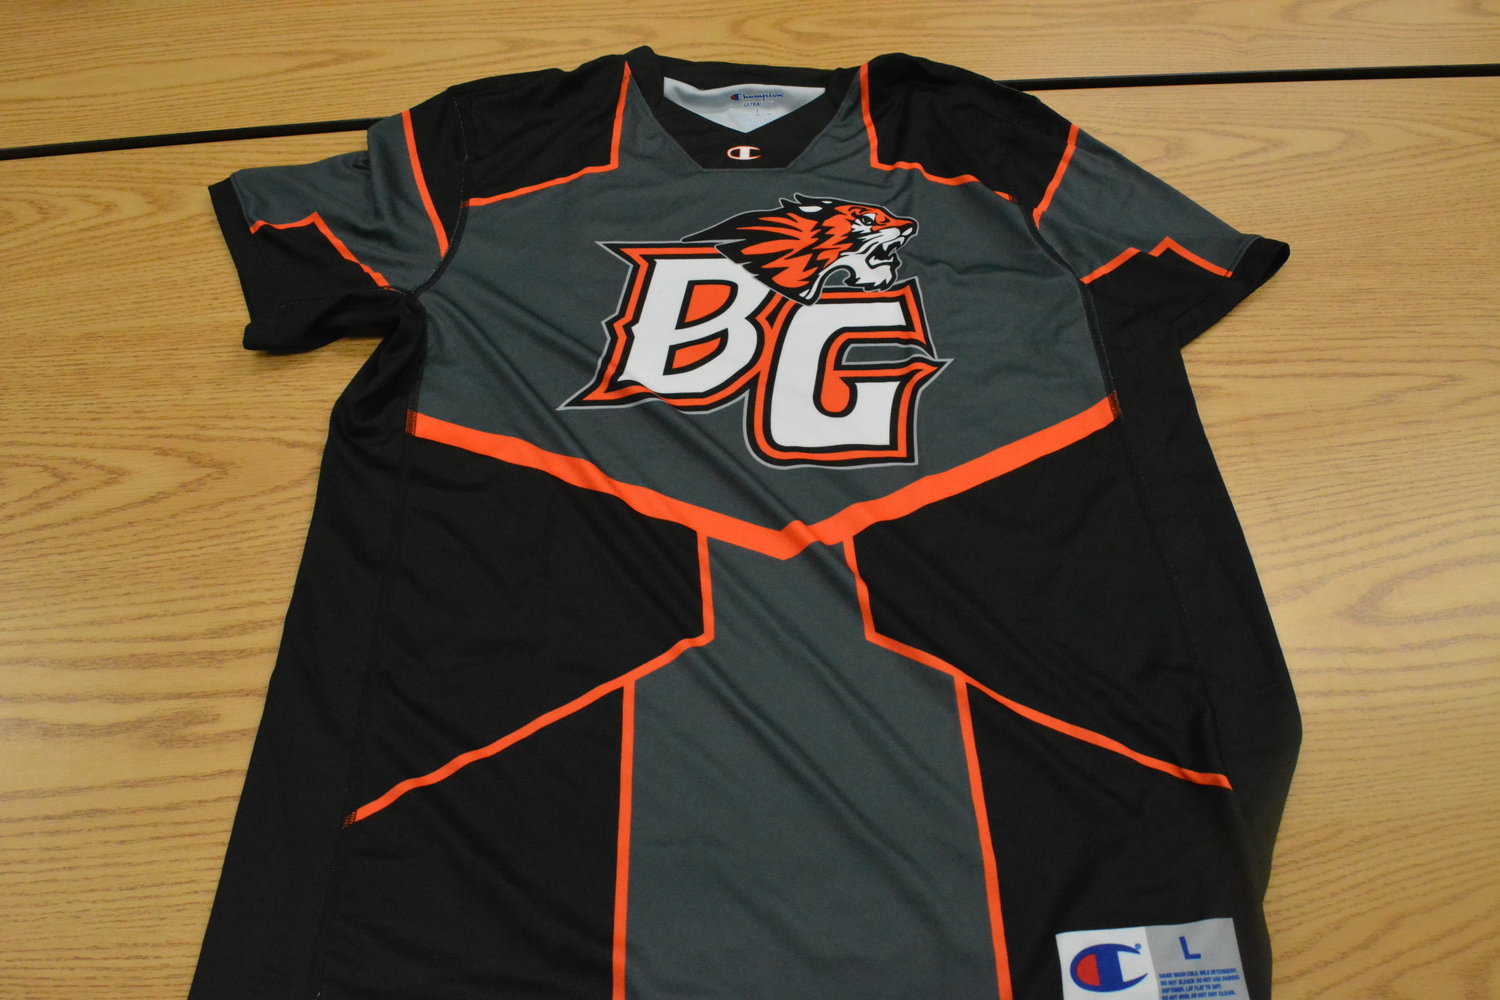 The Esports team’s Tigers jersey, belonging to Dylan Rossimiller, is pictured.